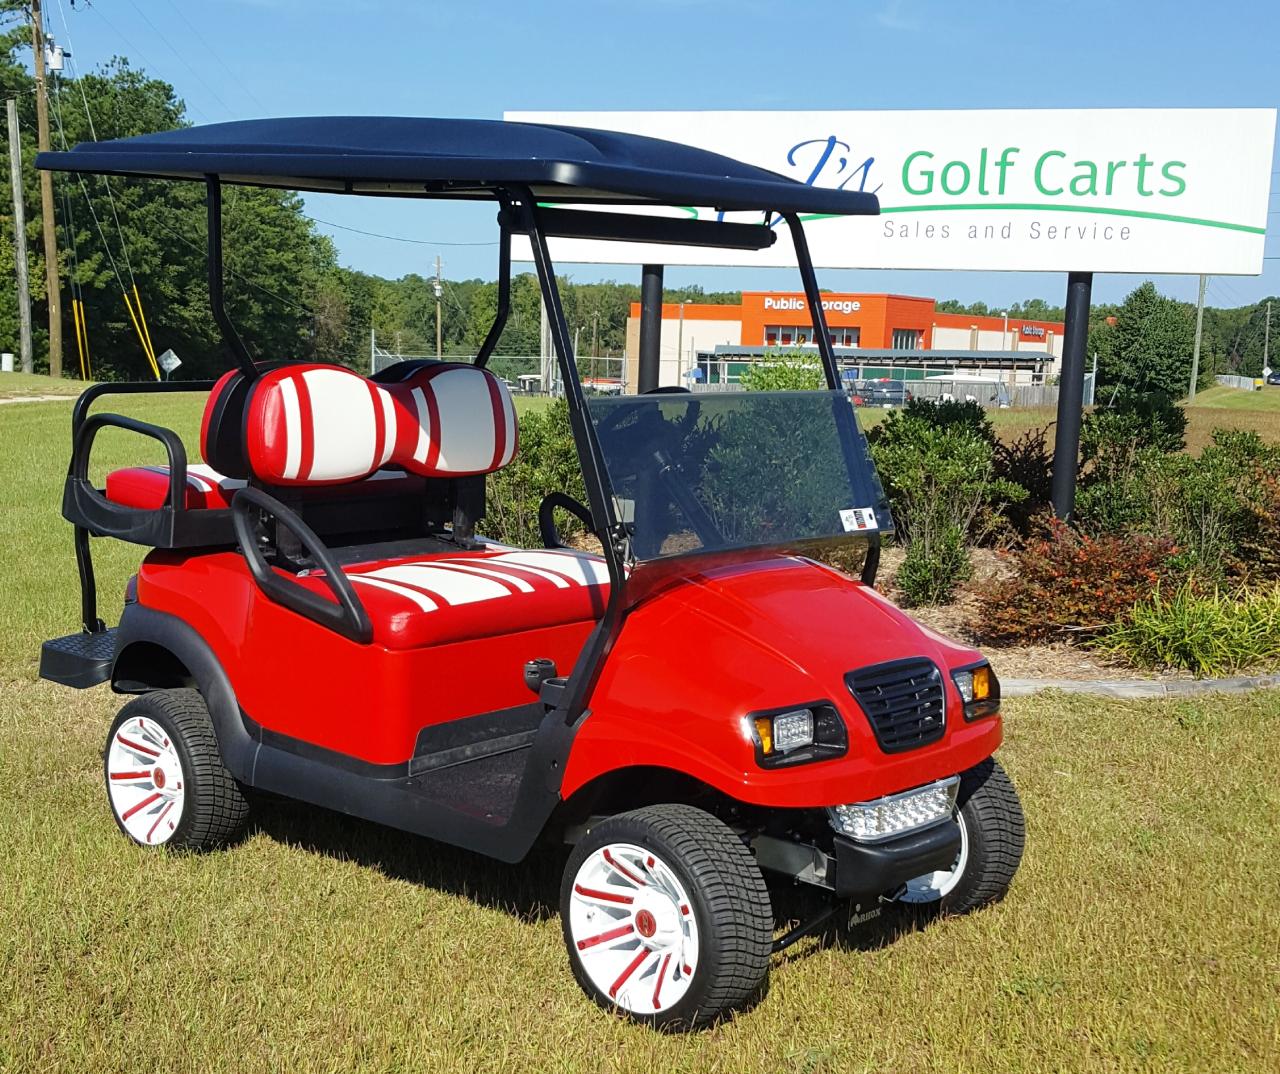 Used Golf Carts for Sale by Owner in McDowell, West Virginia: A Comprehensive Guide